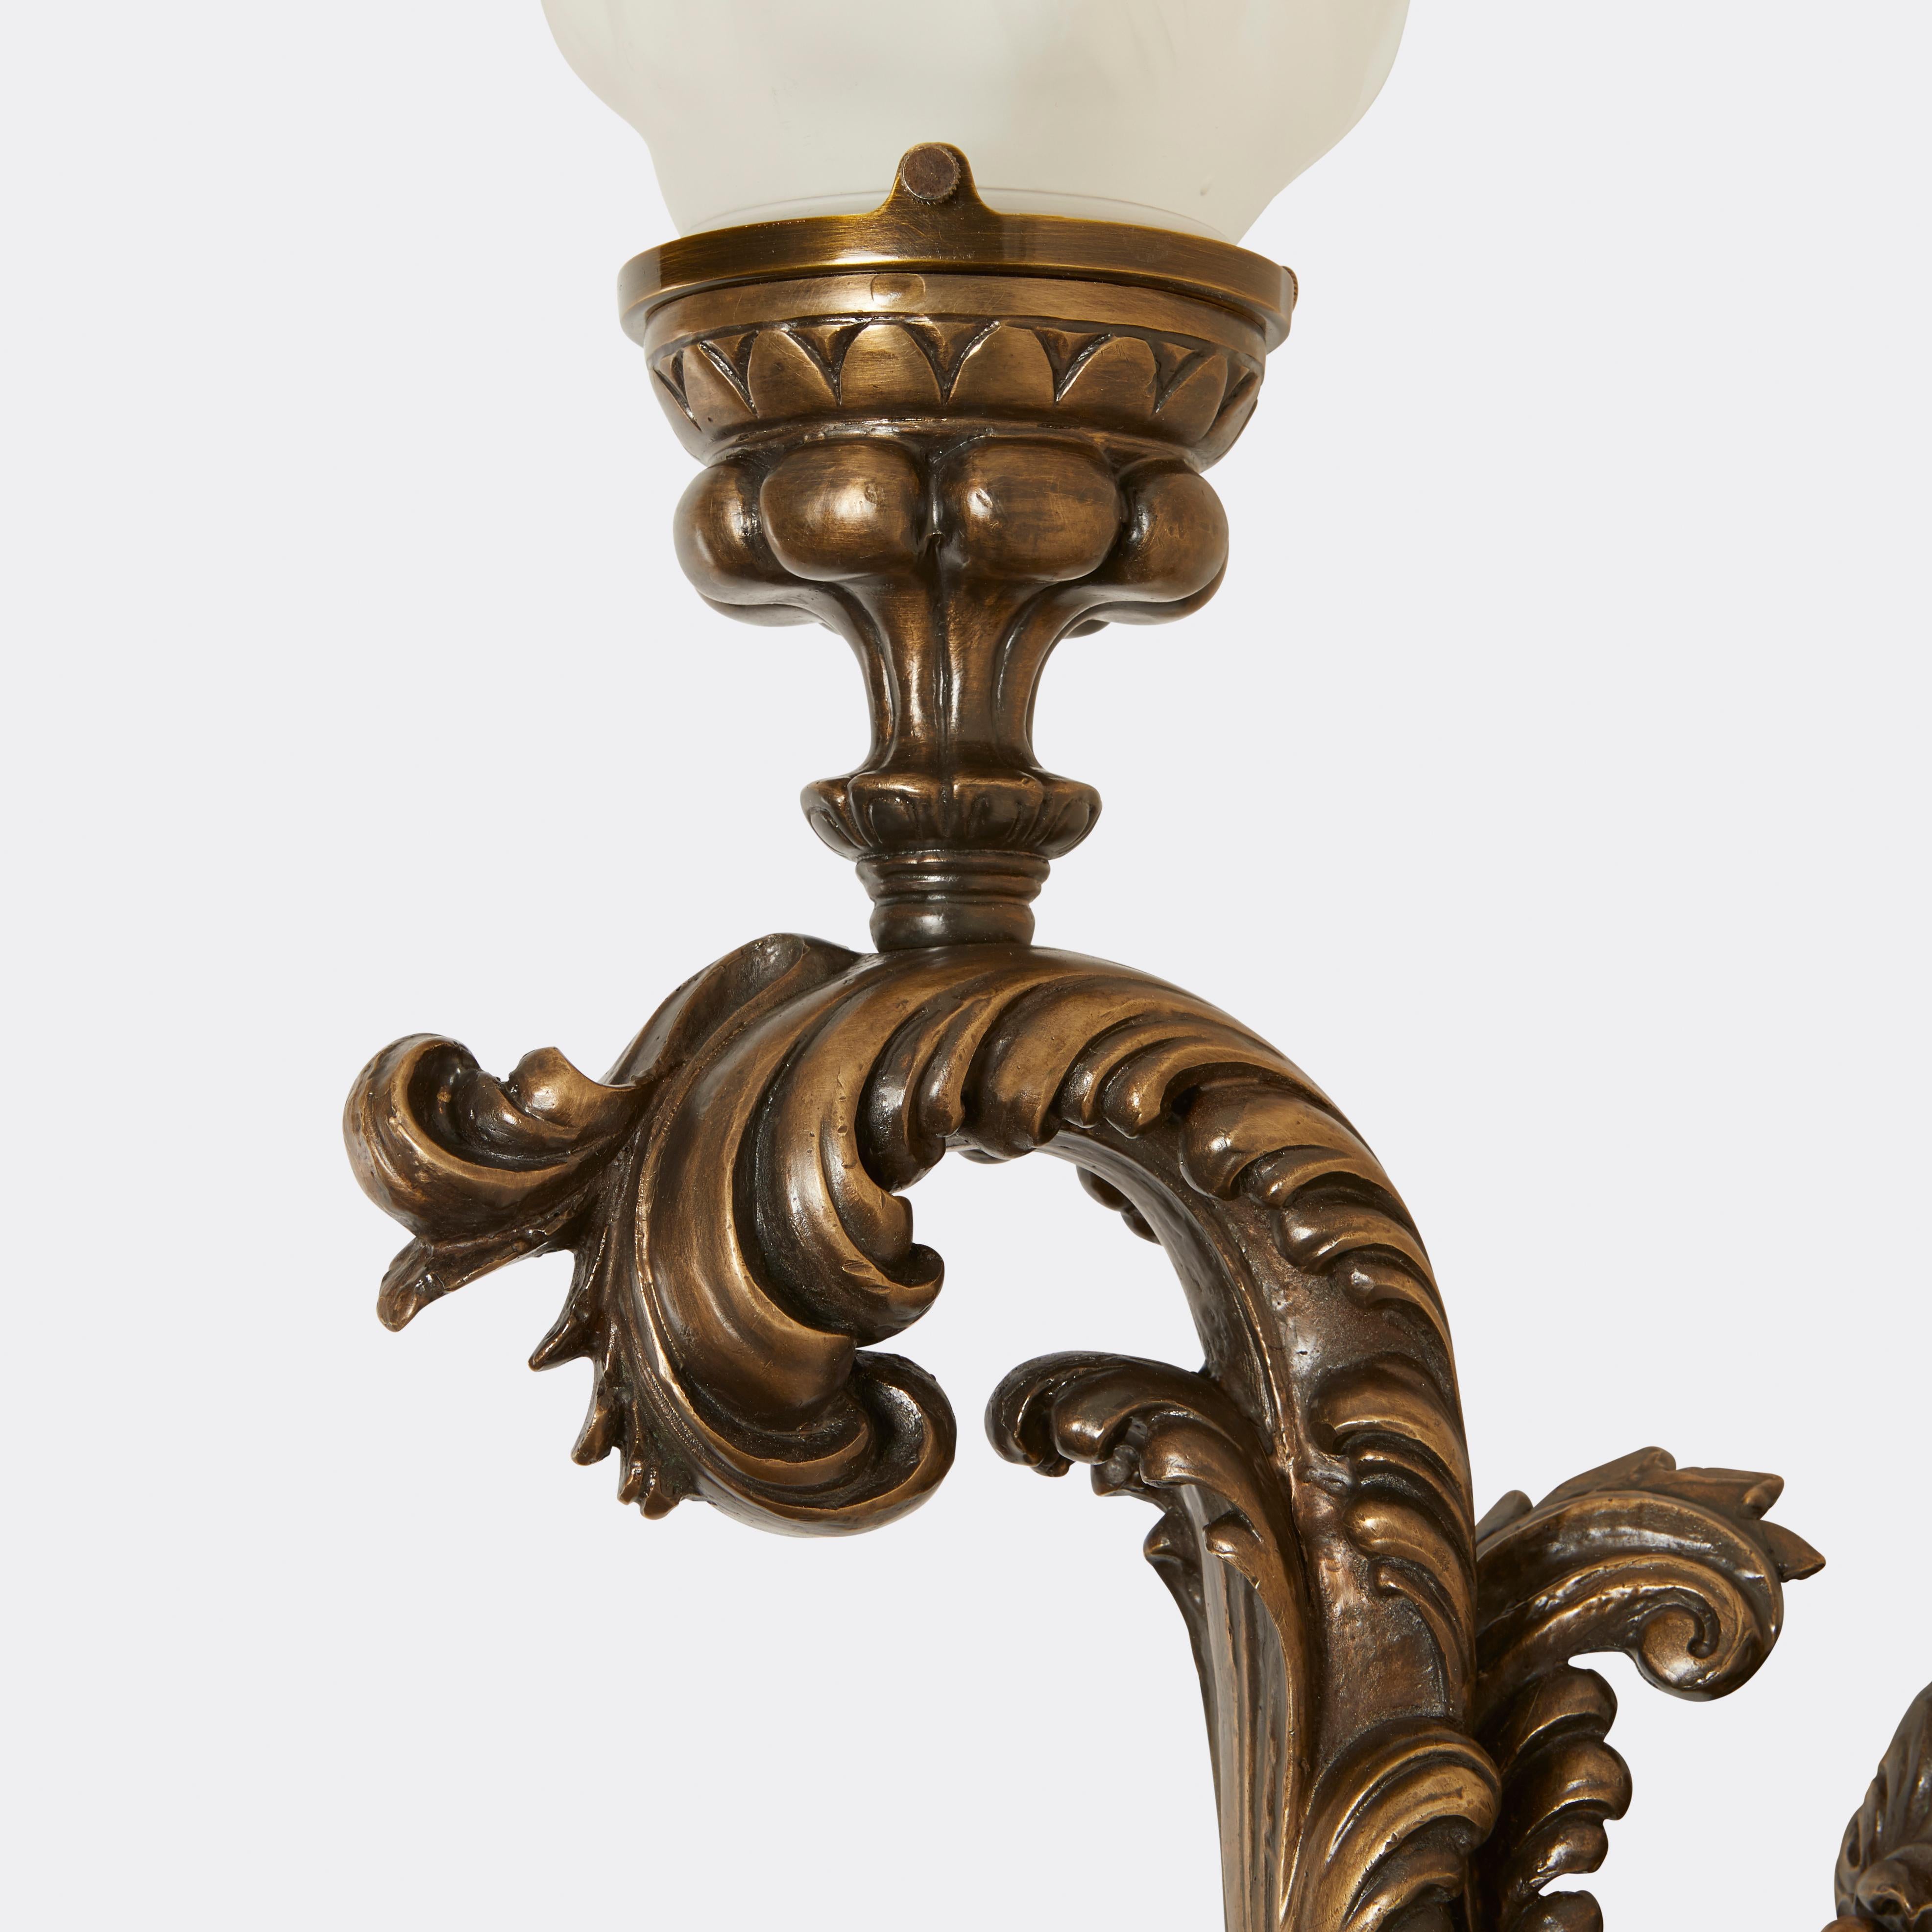 Pair of Renaissance style Torch Sconces cast in brass with glass flame globe. The sconces are from the Caldwell archives, which are made public through the Smithsonian Institute. Used in Stanford White interior.